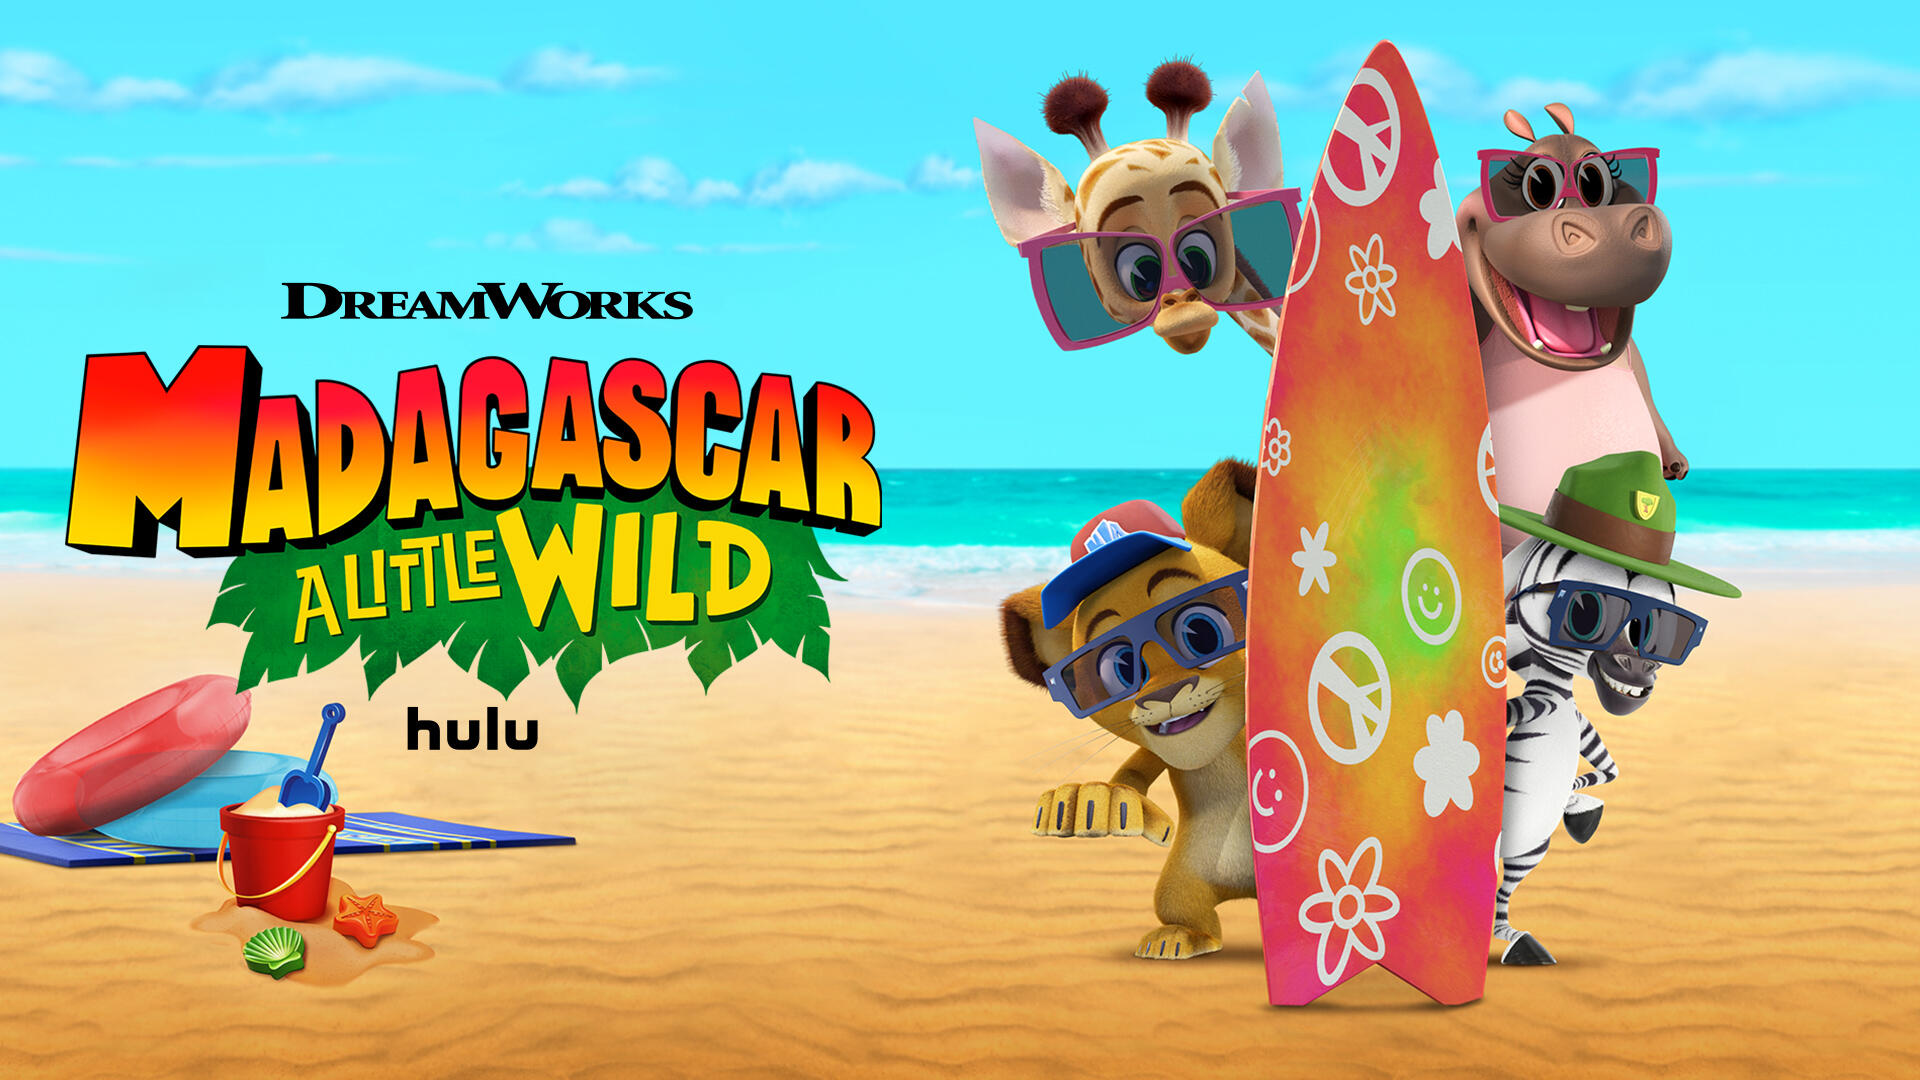 Madagascar: A Little Wild -- Season 8 -- Alex, Marty, Melman and Gloria continue to explore the world outside of the habitat. Marty hoofs it all the way out to a trash-littered beach desperately waiting for his Junior Ranger magic touch! Gloria and Lala reunite after Lala's hibernation, but Gloria doesn’t know how to fit in with her new frog crew. Alex learns on the job directing his first Broadway show. And Melman searches for his own Giraffe herd at another habitat across town, only to discover that you don't have to be the same species to be a family! (Courtesy of DreamWorks)